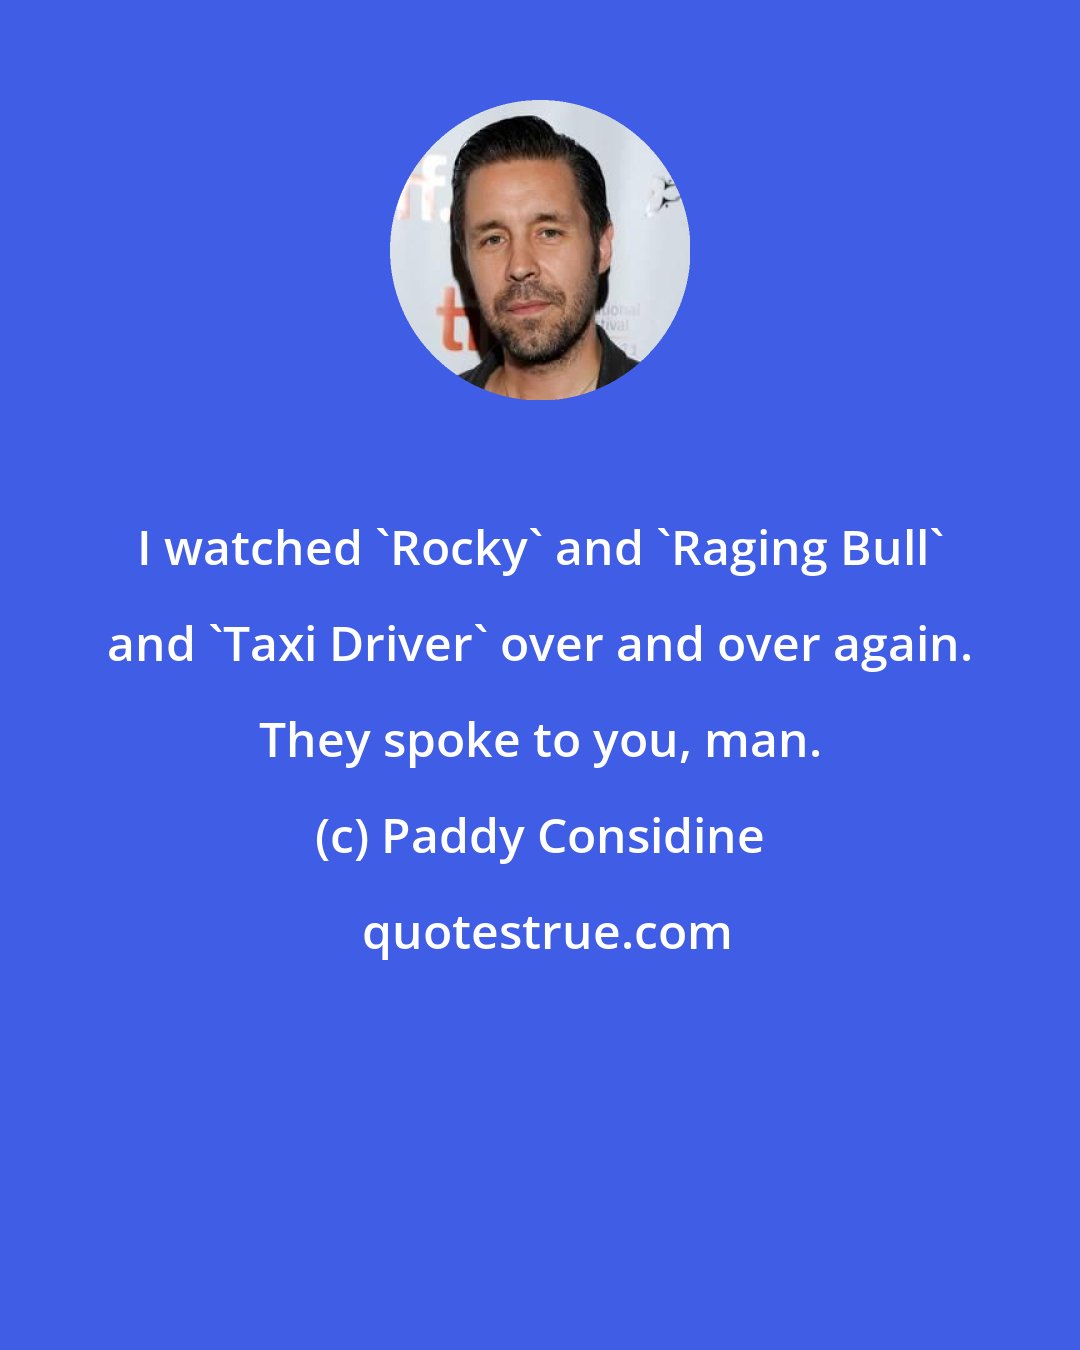 Paddy Considine: I watched 'Rocky' and 'Raging Bull' and 'Taxi Driver' over and over again. They spoke to you, man.